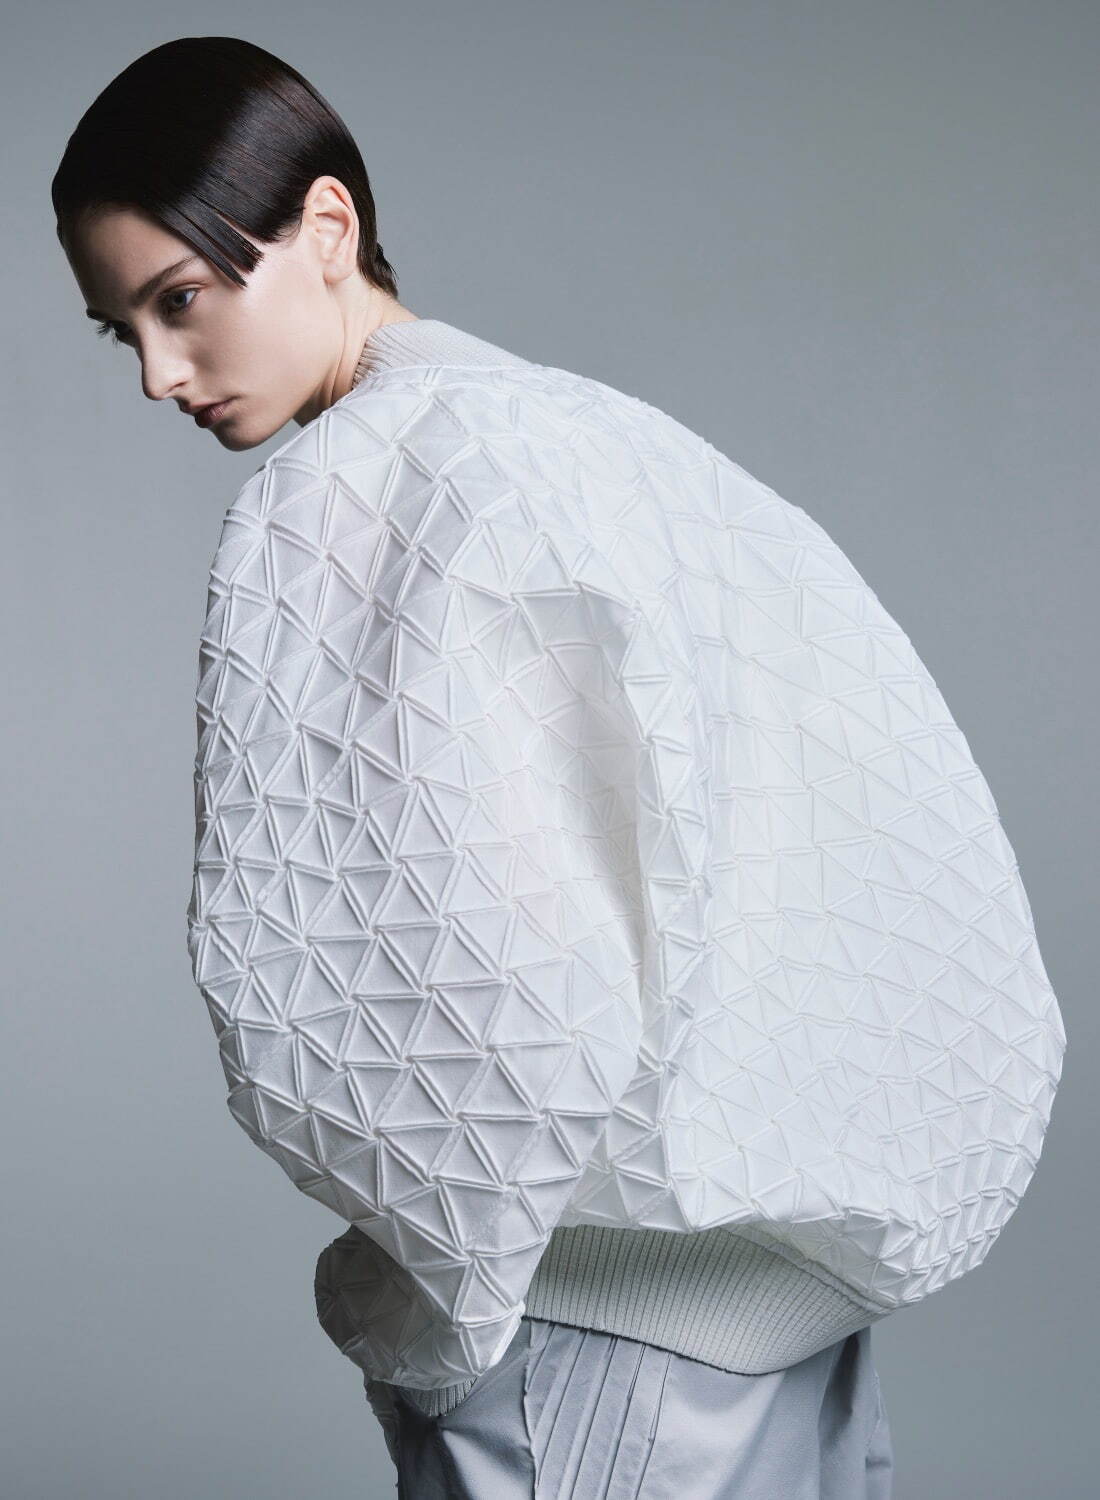 A-POC ABLE ISSEY MIYAKE＋Nature Architects 《TYPE-V Nature Architects project》
© ISSEY MIYAKE INC.